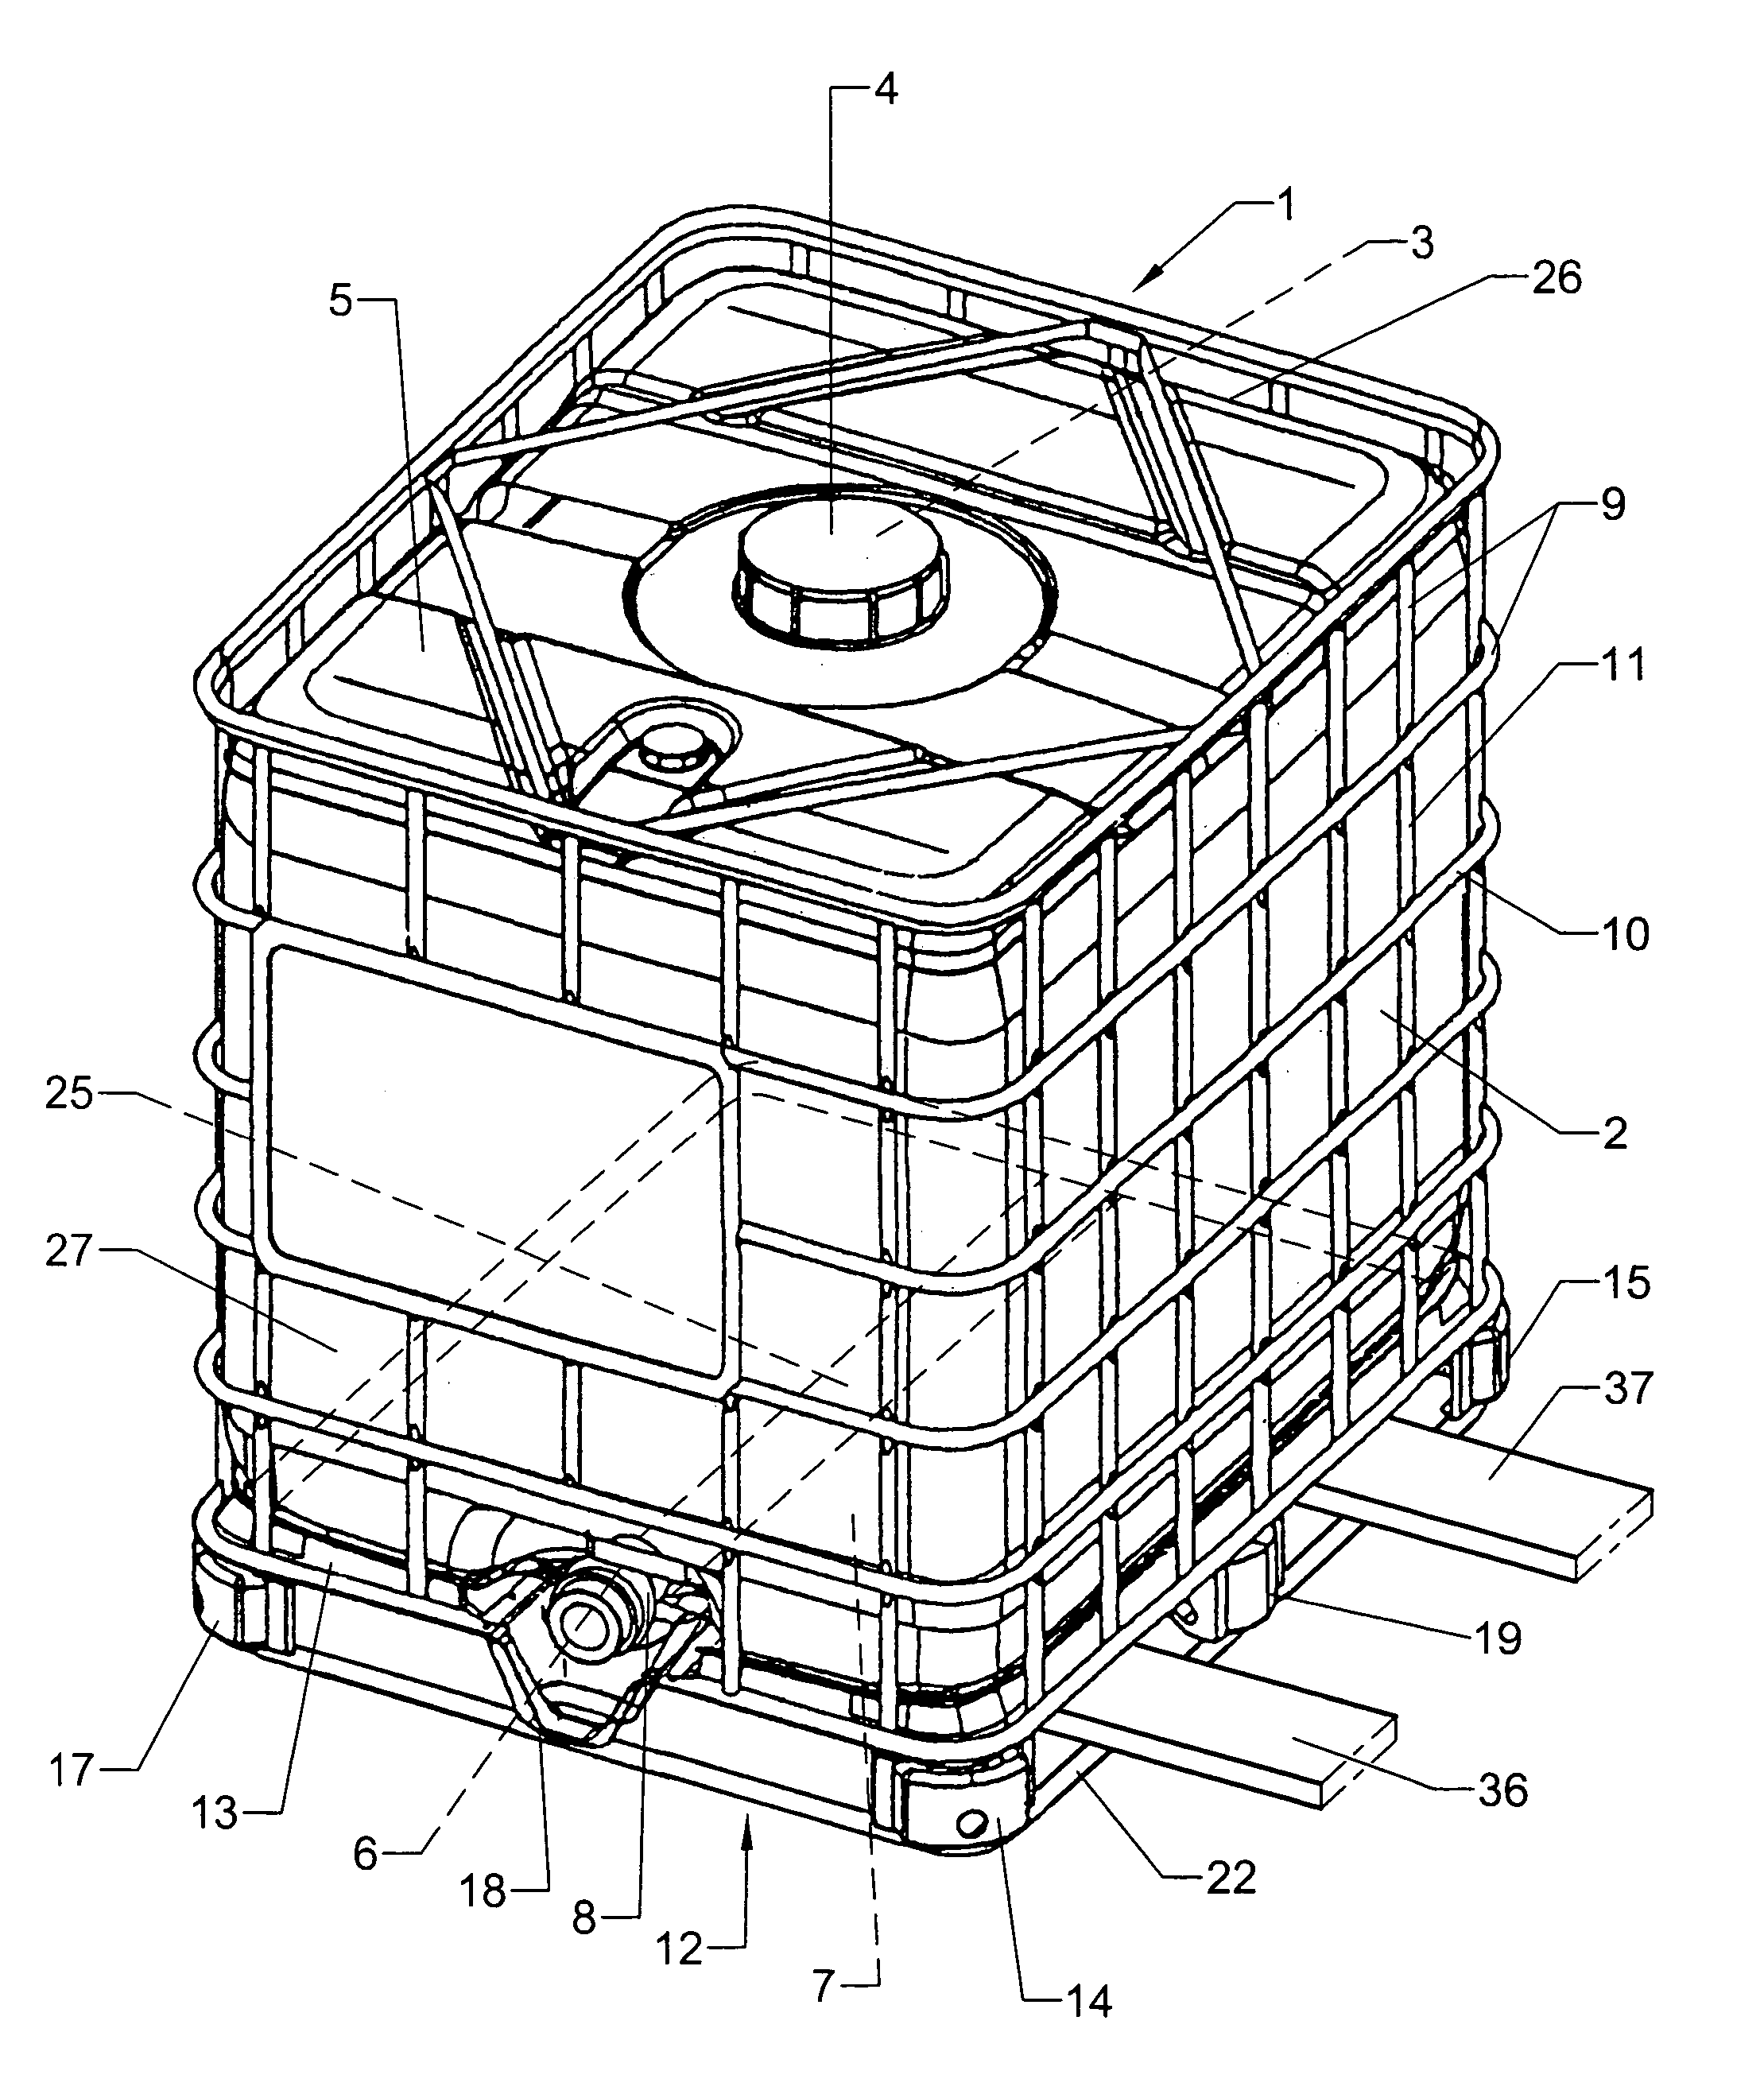 Pallet-type support frame for transport and storage containers for liquids